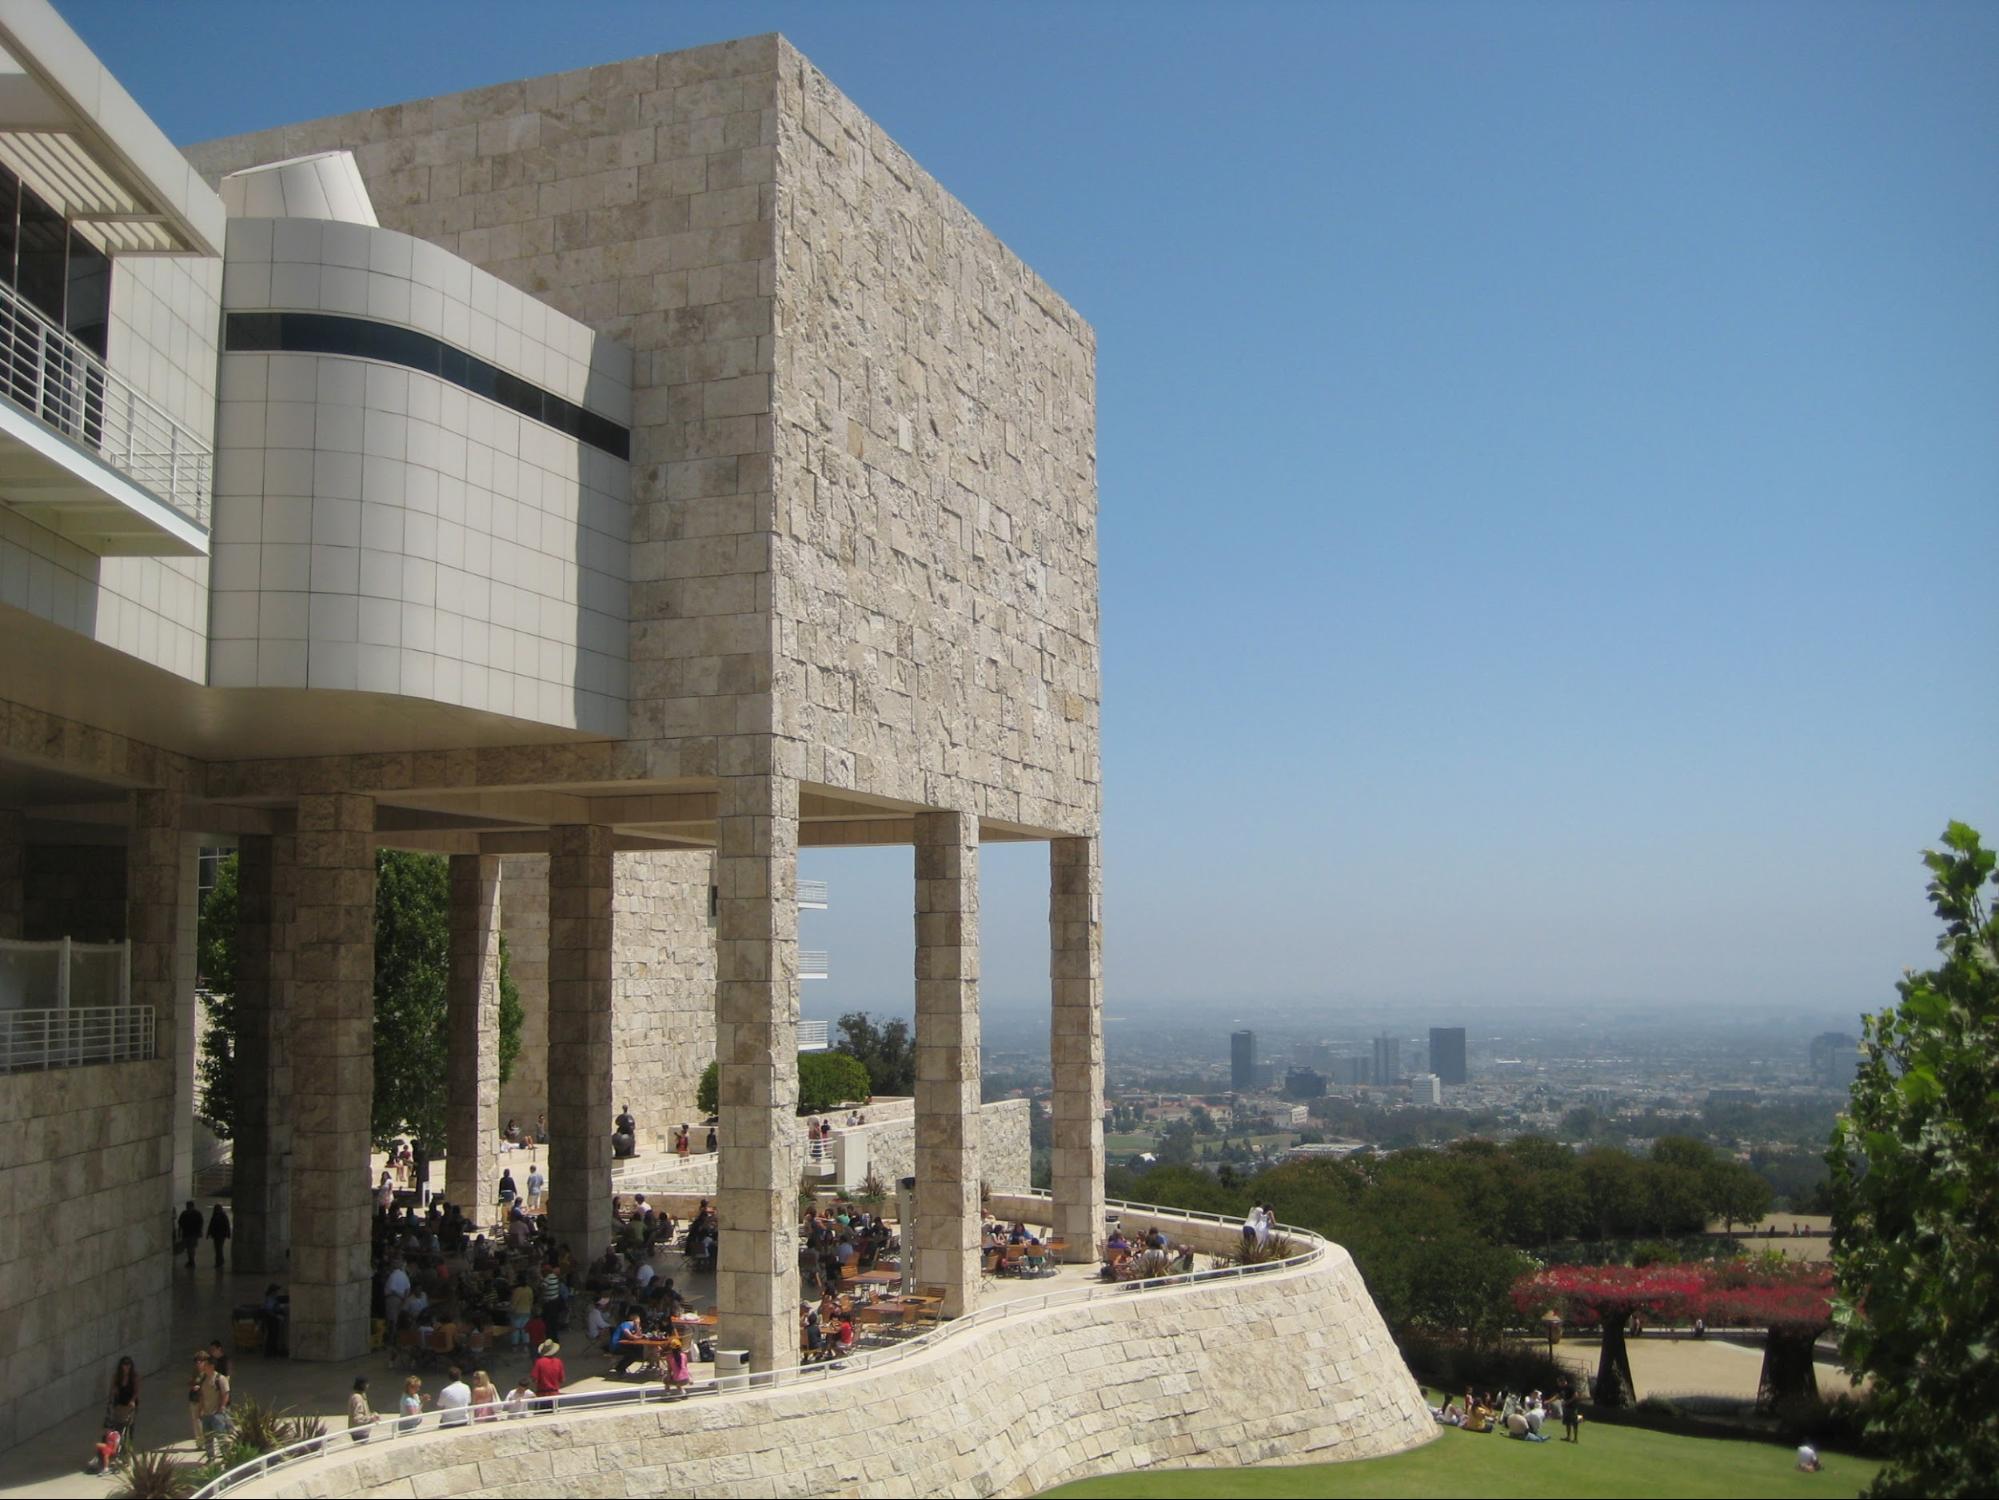 If you’re willing to pay for parking, you can work for free at The Getty in Los Angeles, California. Photo courtesy Ricardo Diaz.